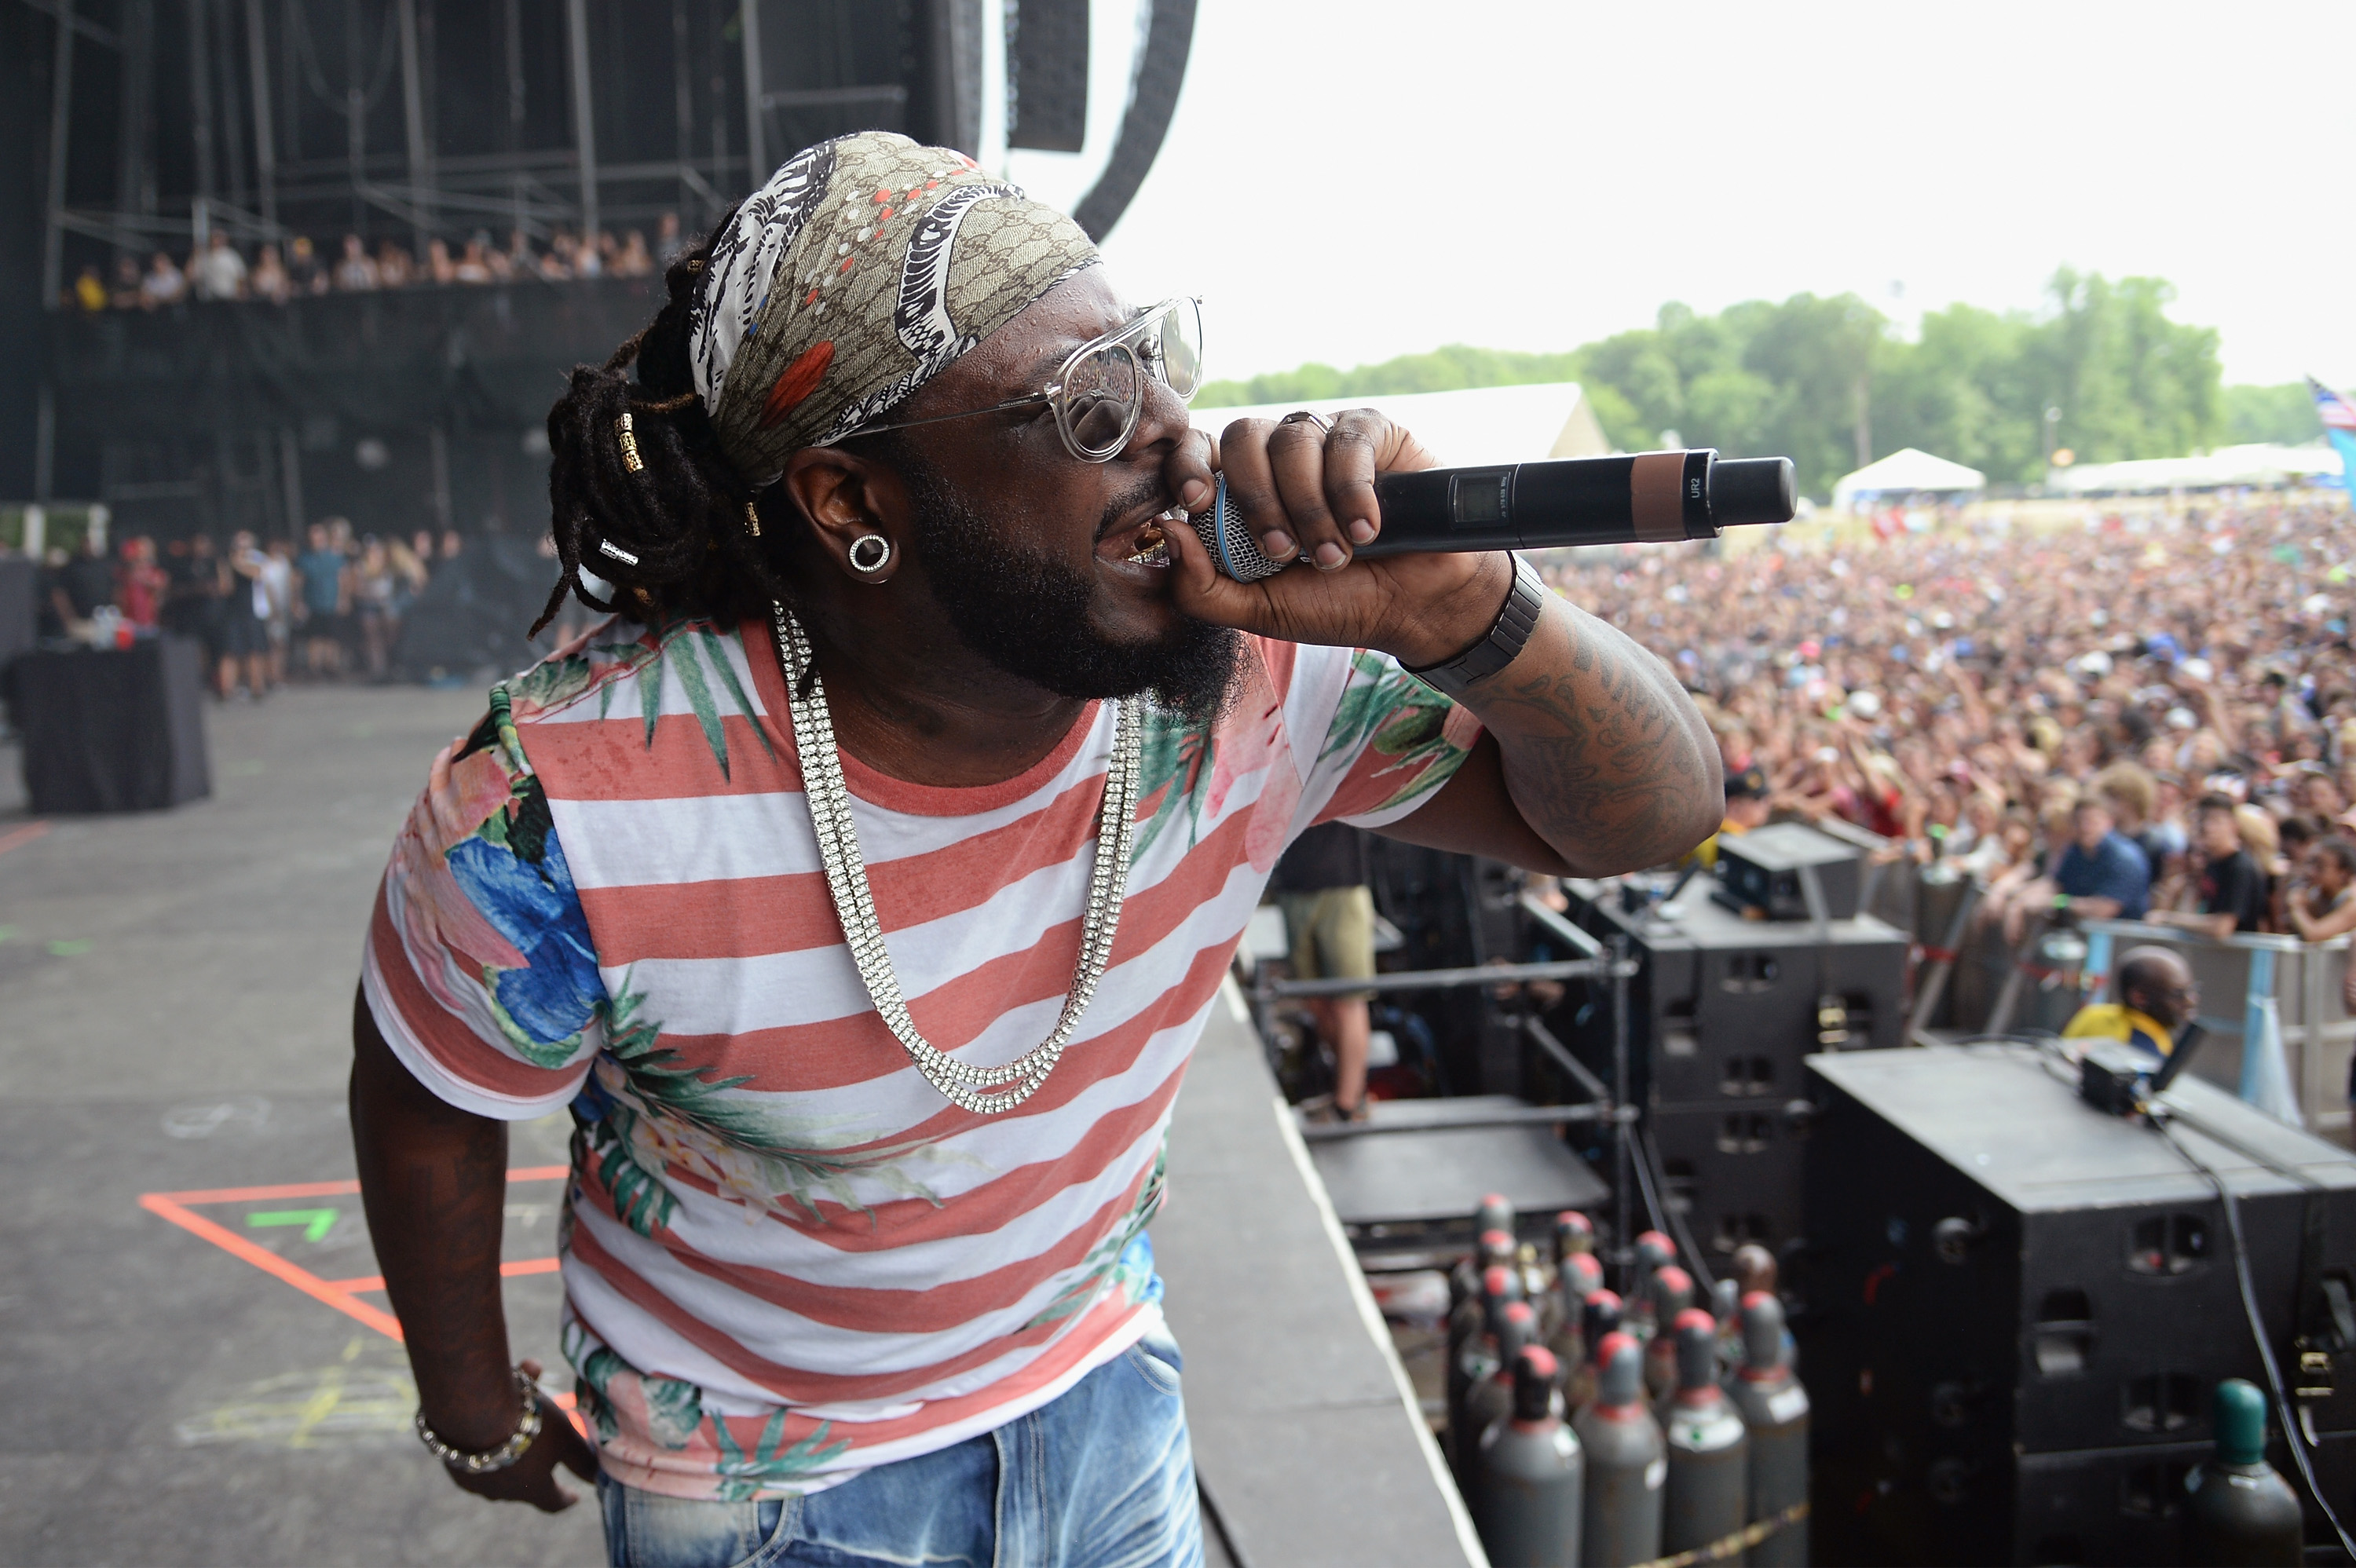 Rapper T-Pain performs onstage during the 2017 Firefly Music Festival on June 17, 2017 in Dover, Delaware. (Photo by Kevin Mazur—Getty Images for Firefly)